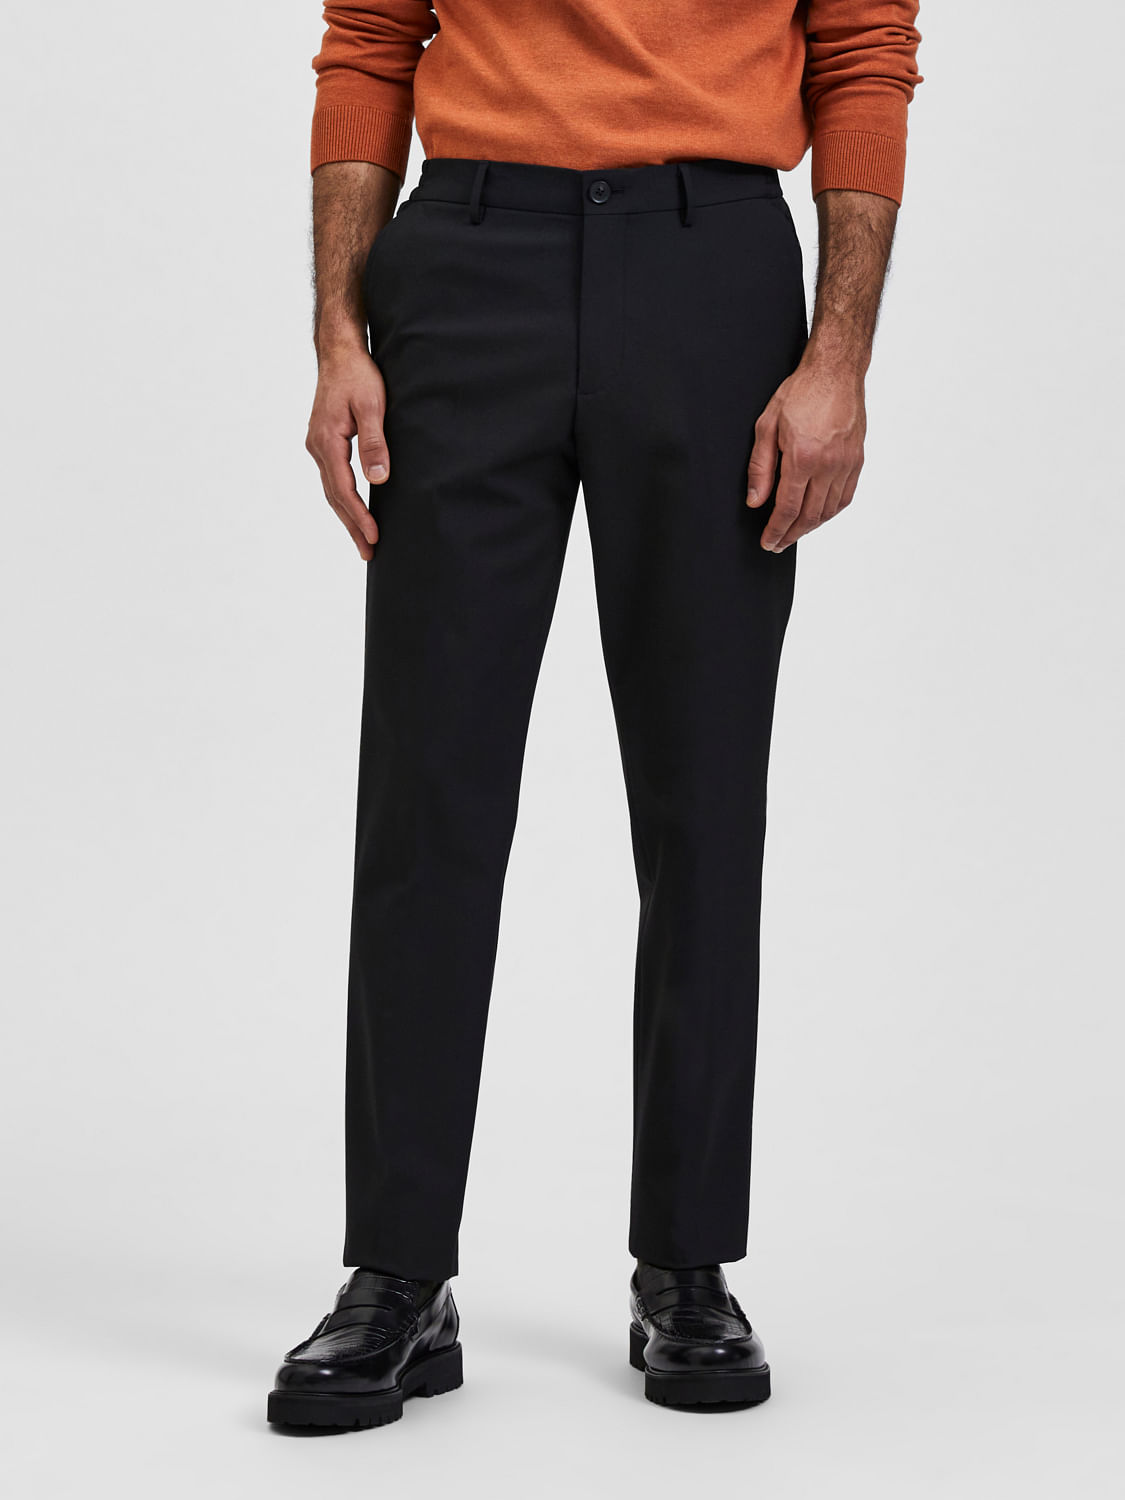 Polo Ralph Lauren Tailored Trousers, Black at John Lewis & Partners